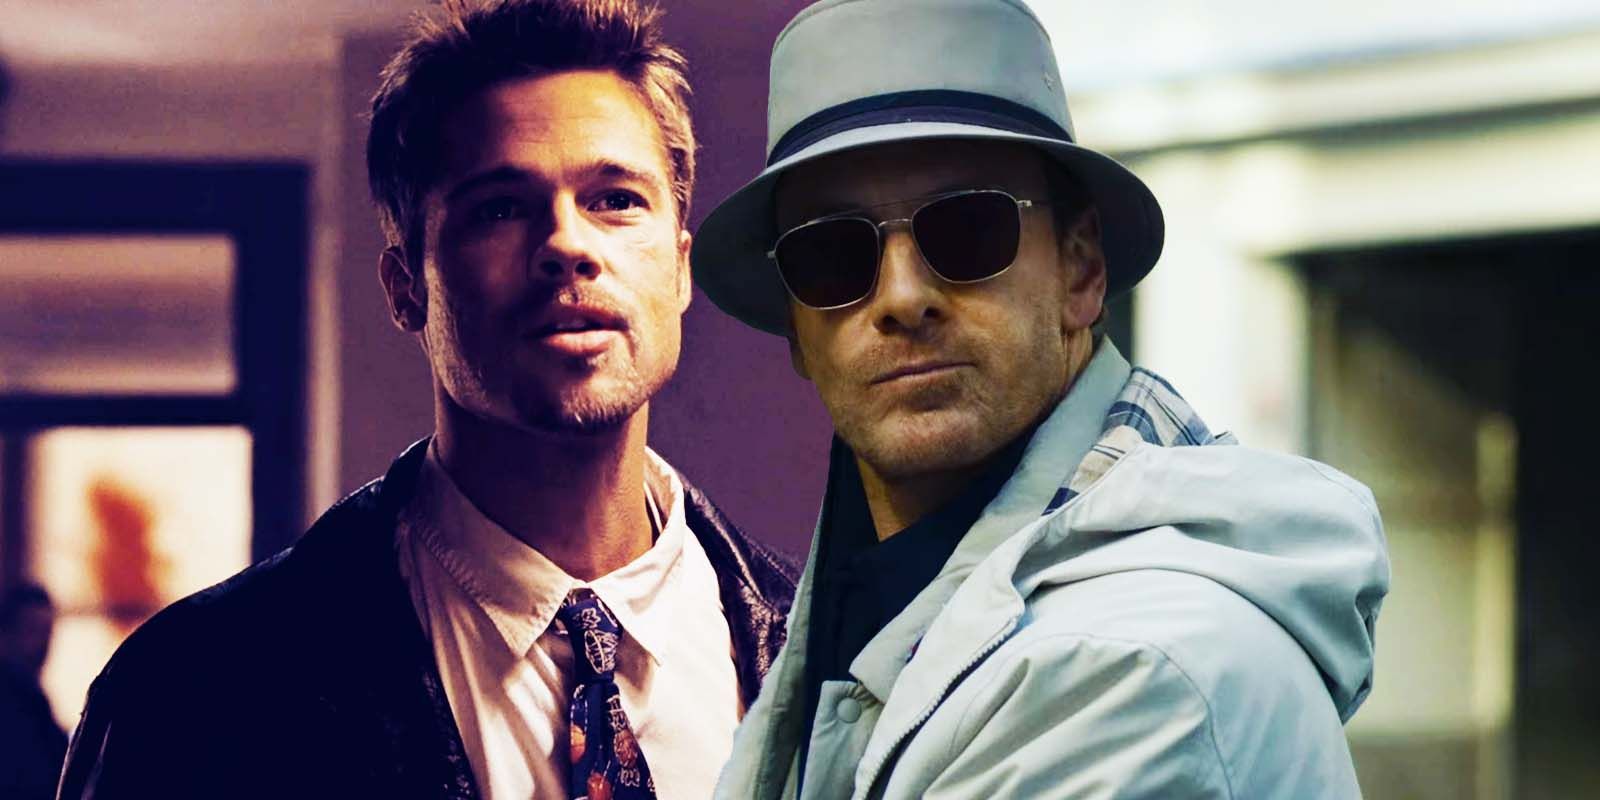 Brad Pitt as Mills in Seven and Michael Fassbender as the titular character in The Killer